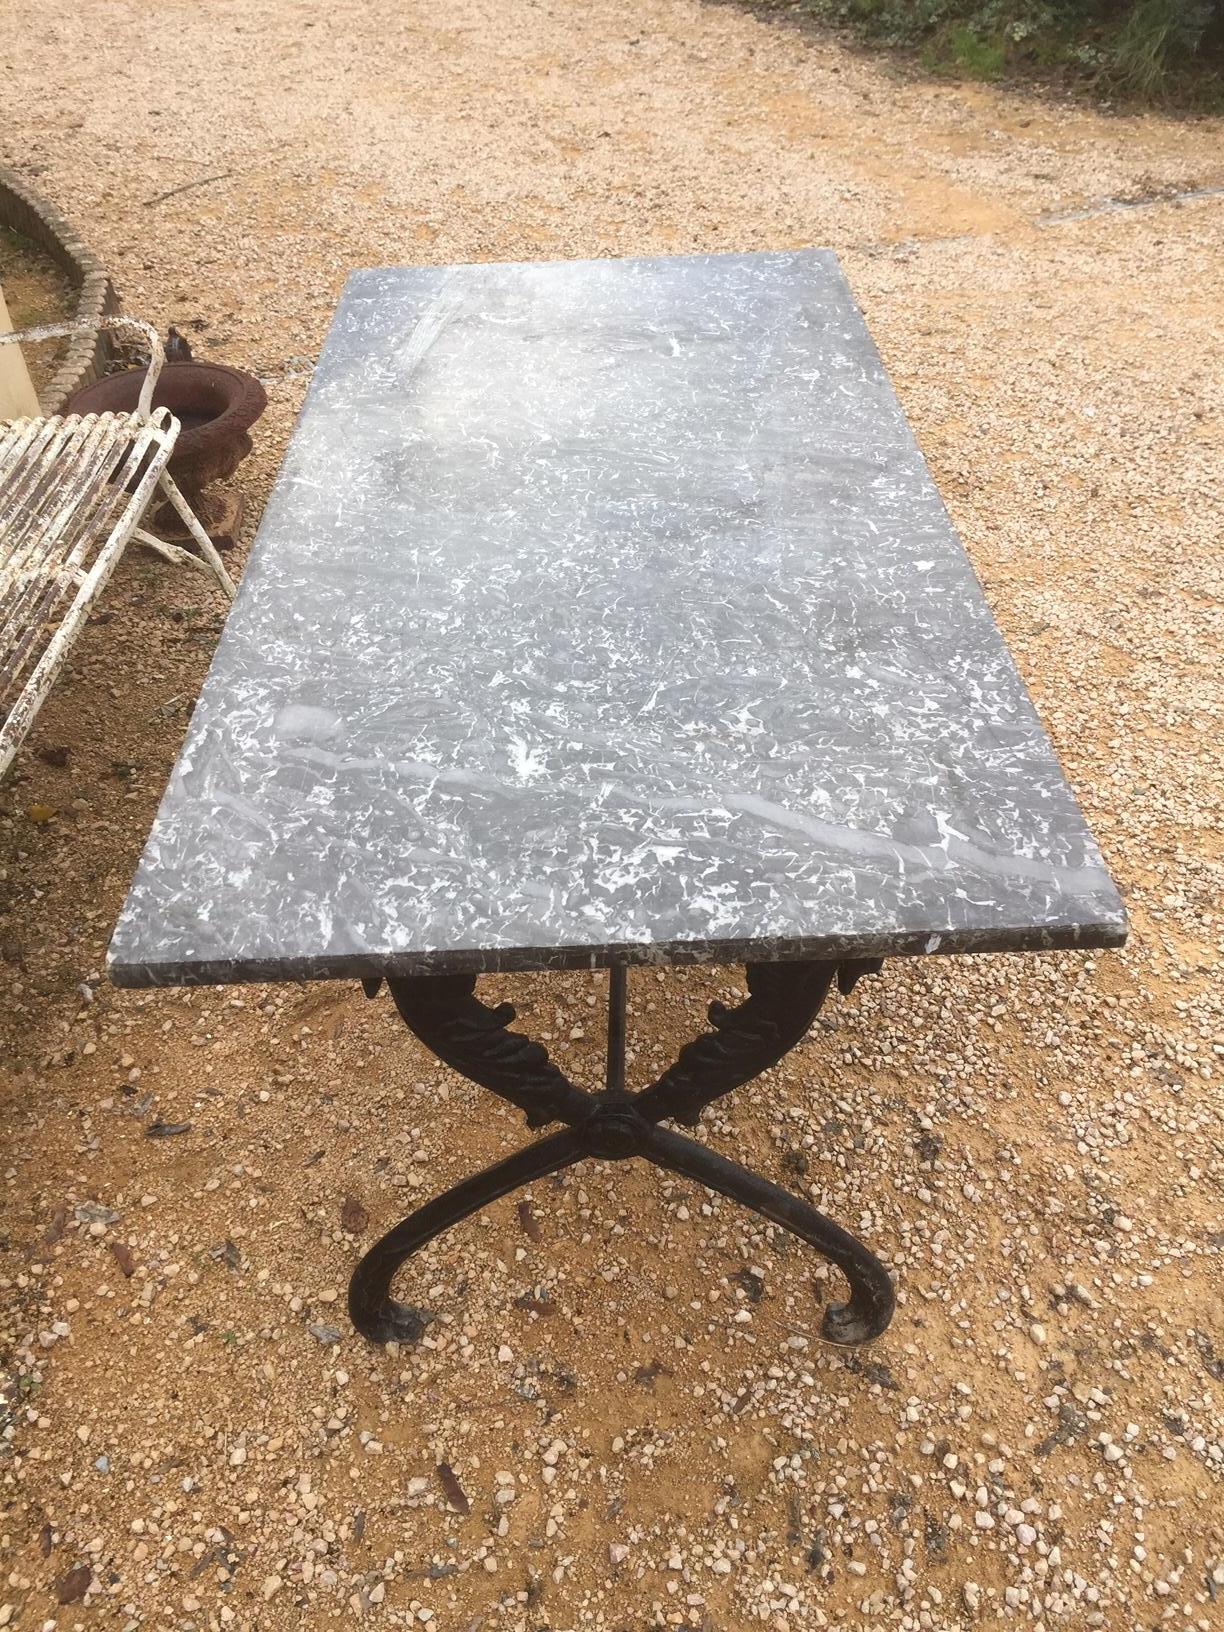 Beautiful early 19th century Empire period gooseneck base marble table.
The marble top is removable from the base. The base is made with melt and represent two gooseneck on each side.
Very nice quality.